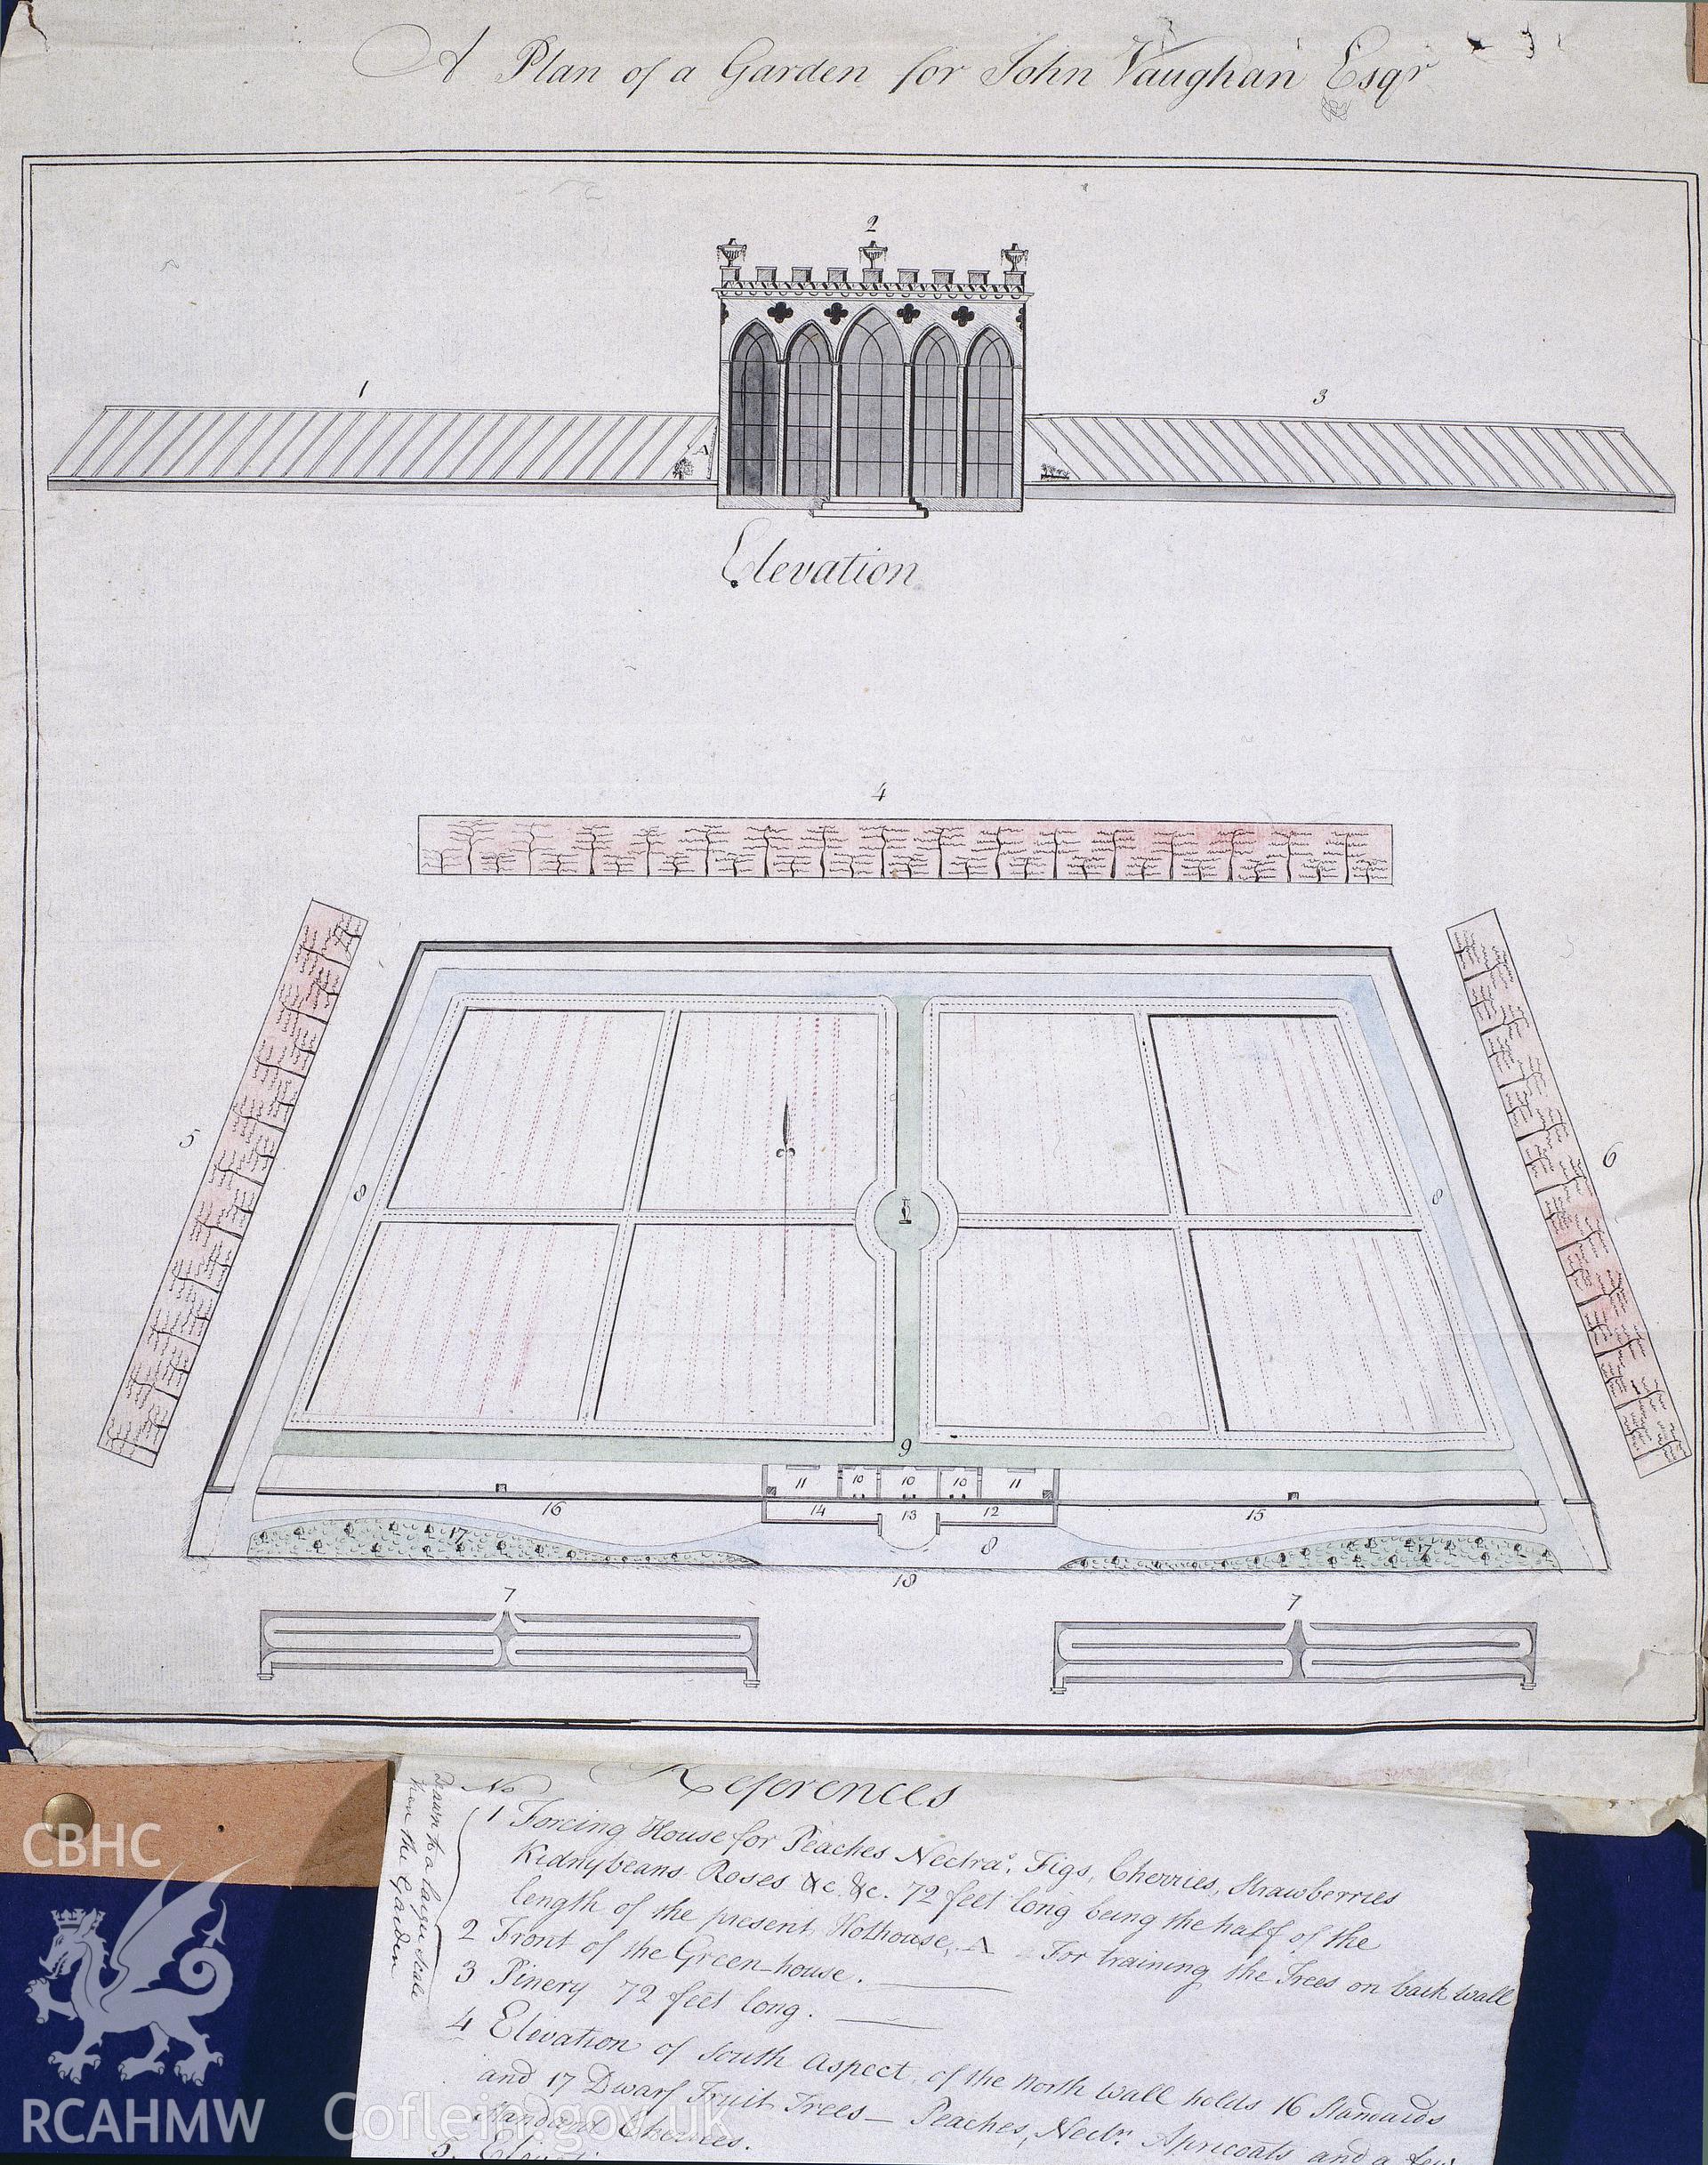 RCAHMW colour transparency showing an undated garden plan produced for John Vaughan.